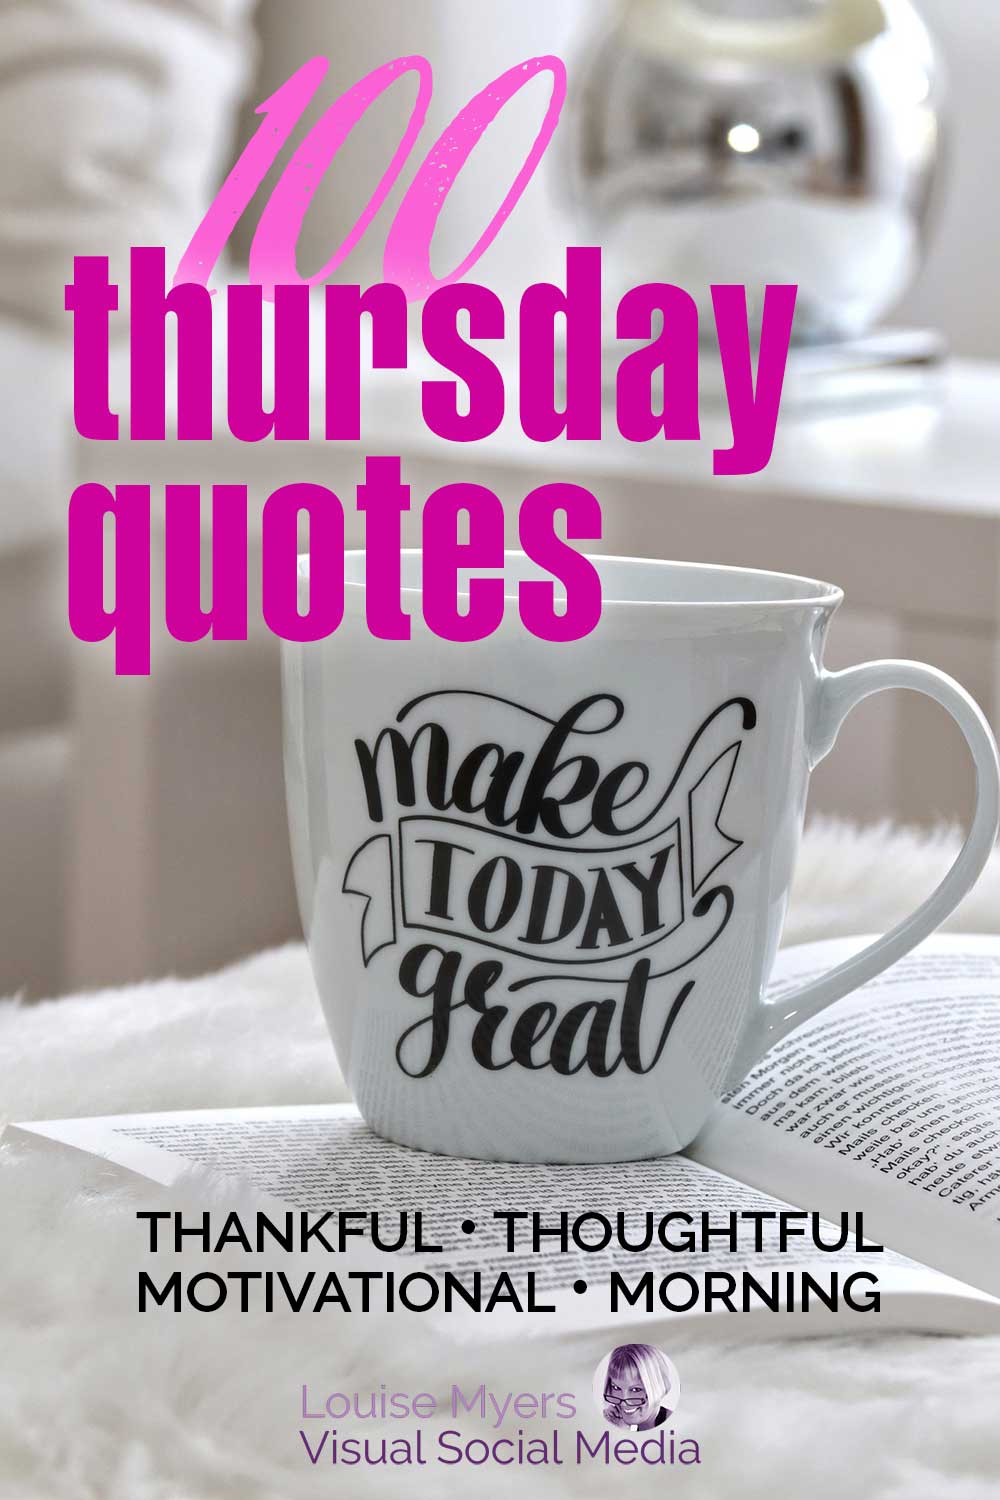 100 Best Thursday Quotes for a Motivated and Thankful Day